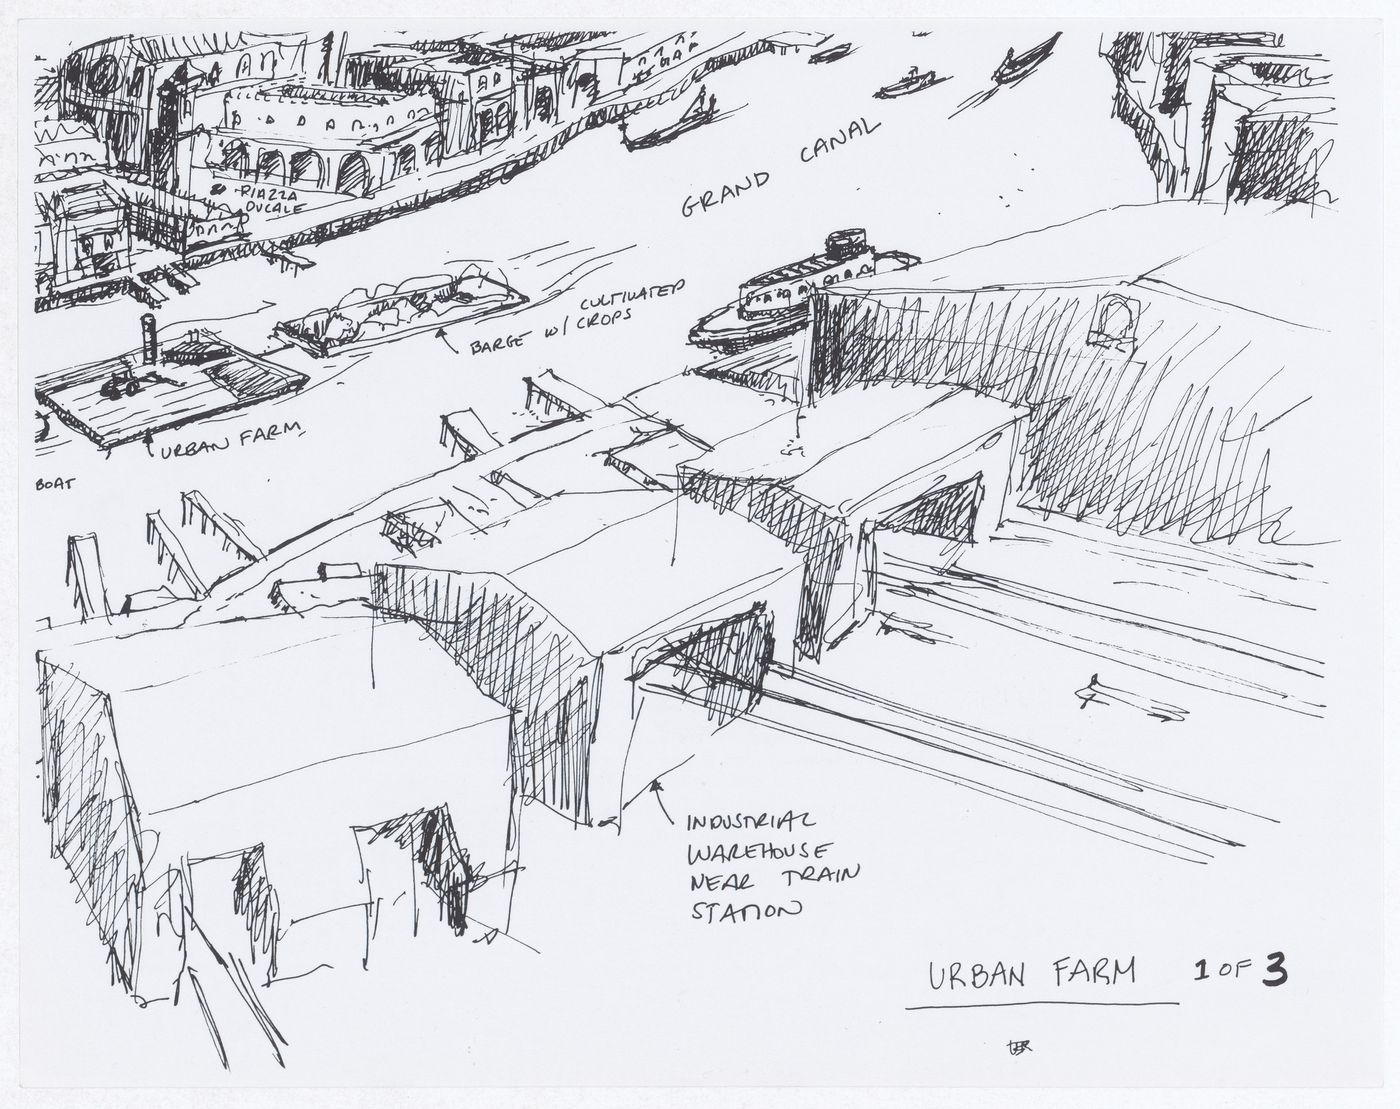 Plan for an urban farm for the exhibition on James Wines at the Venice Biennale